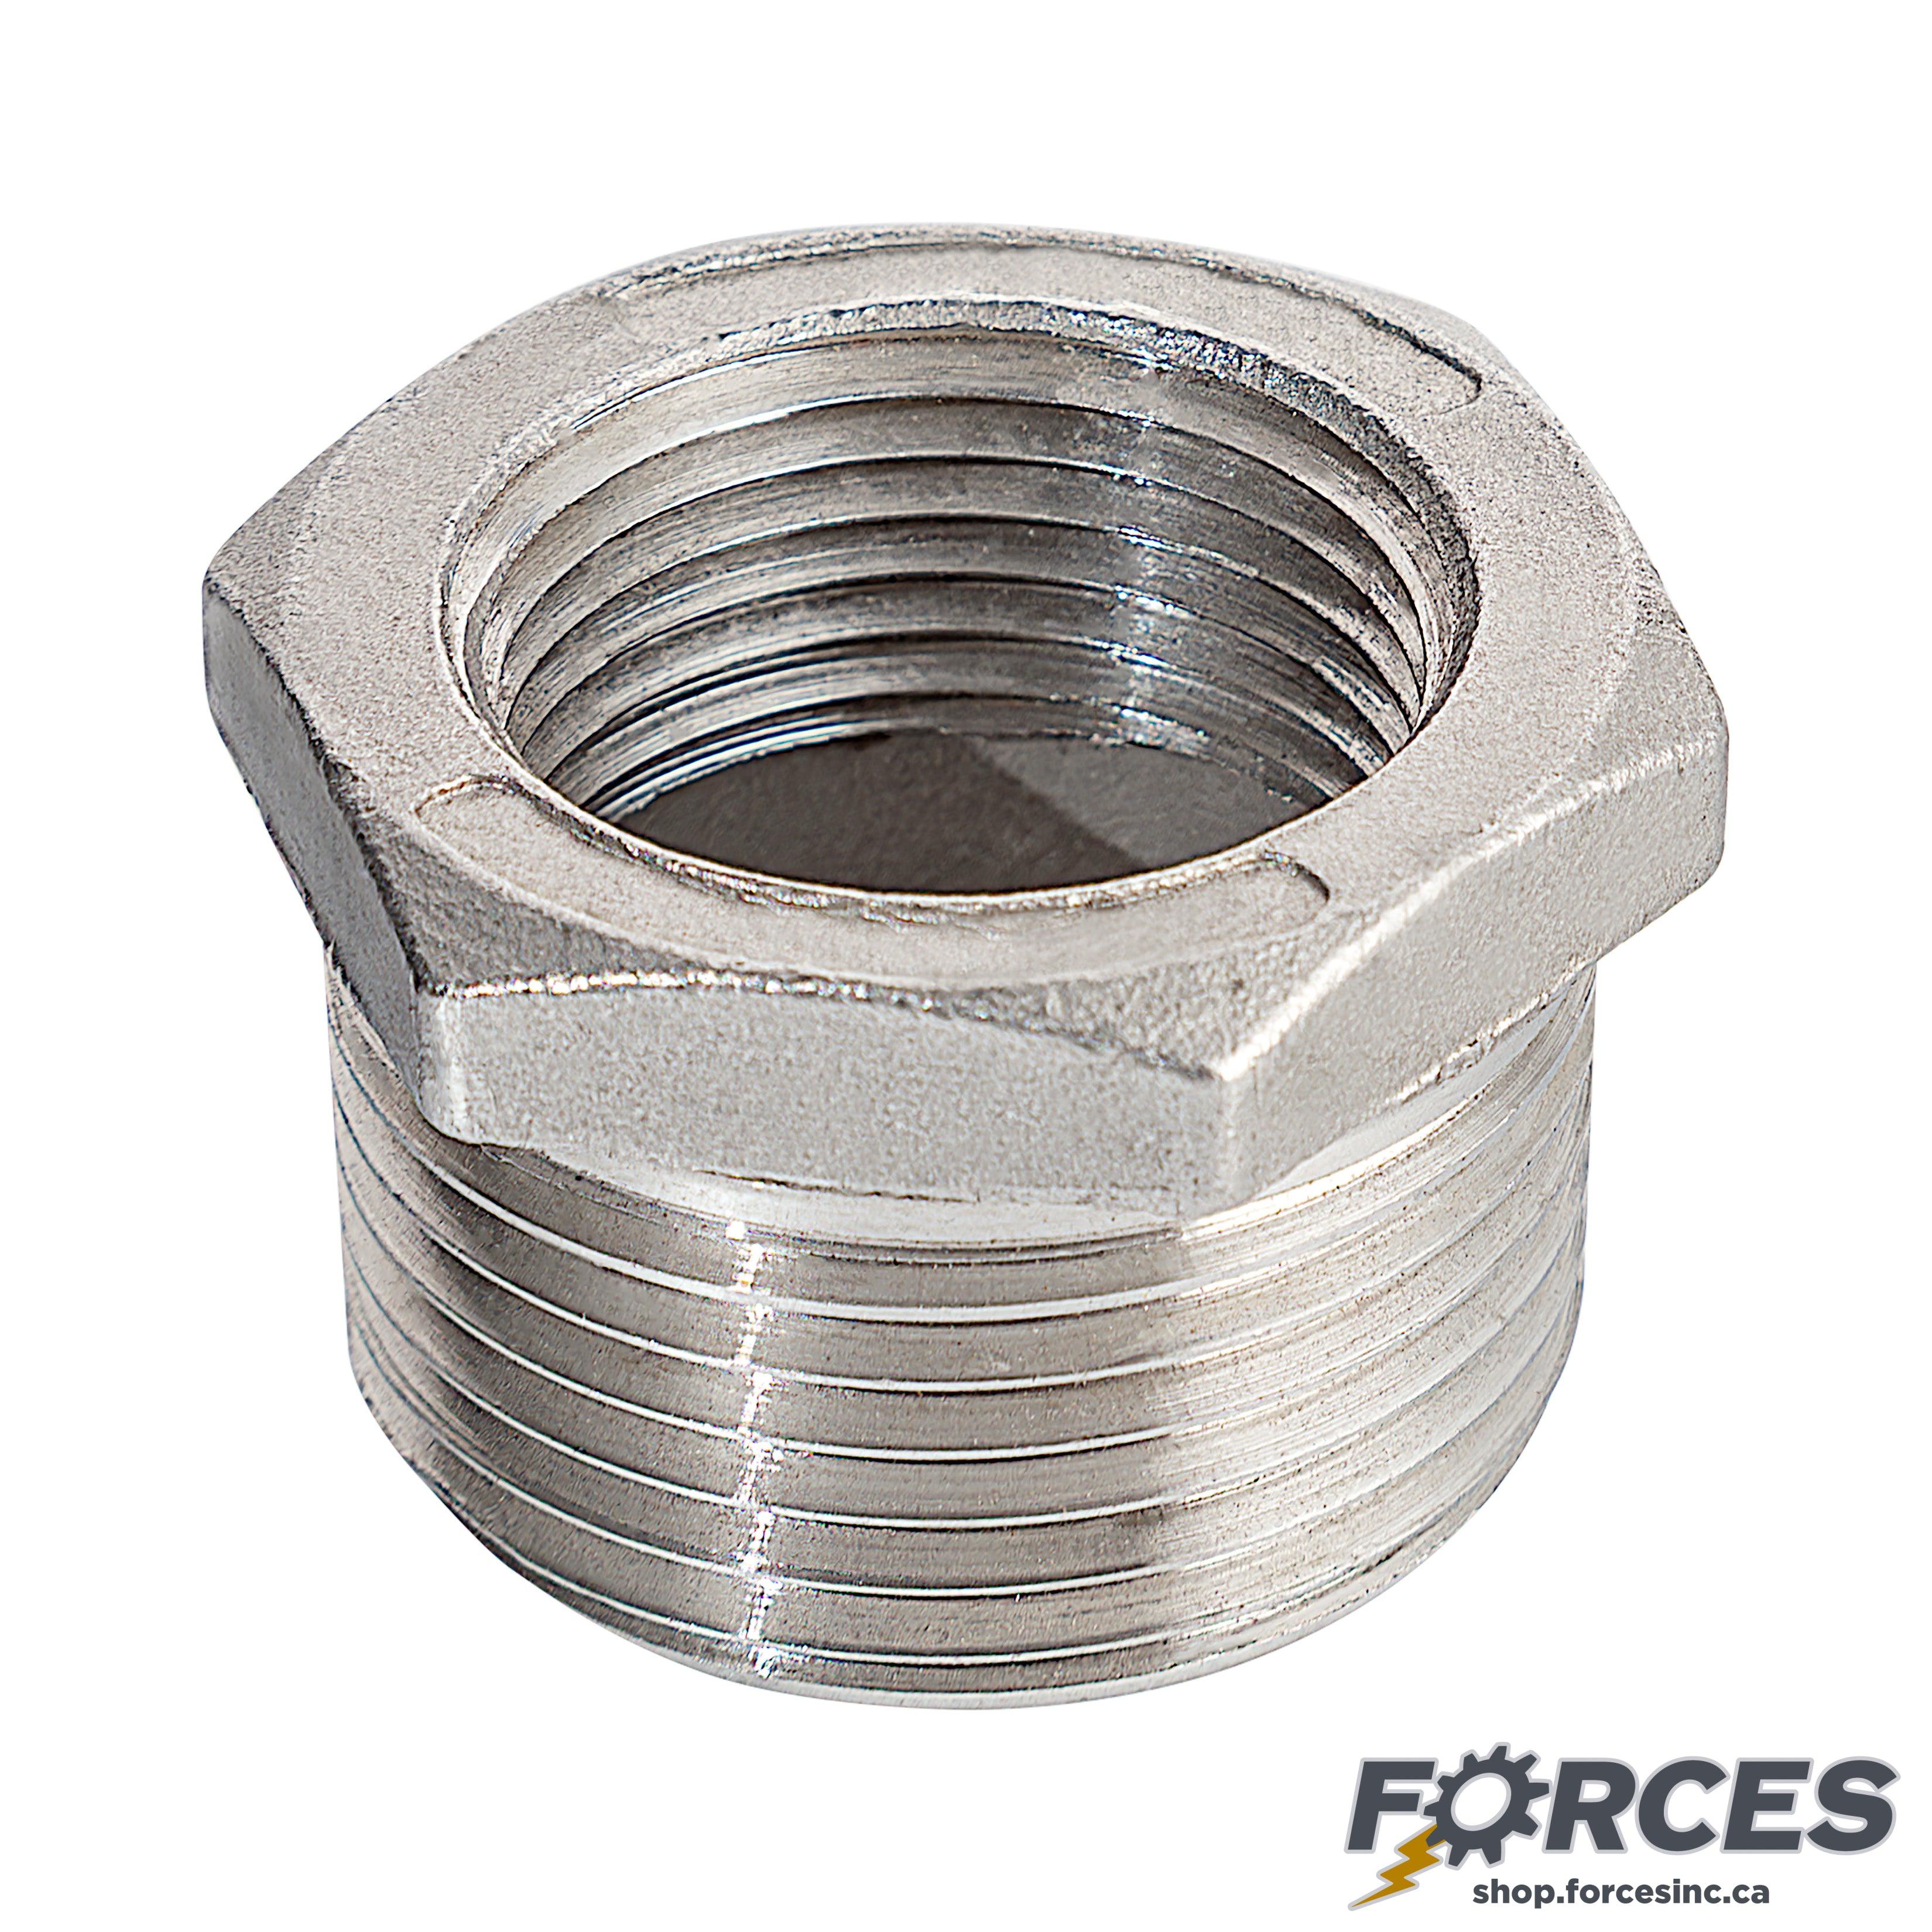 1-1/4" (M) x 1/2" (F) Reducing Hex Bushing NPT #150 - Stainless Steel 316 - Forces Inc